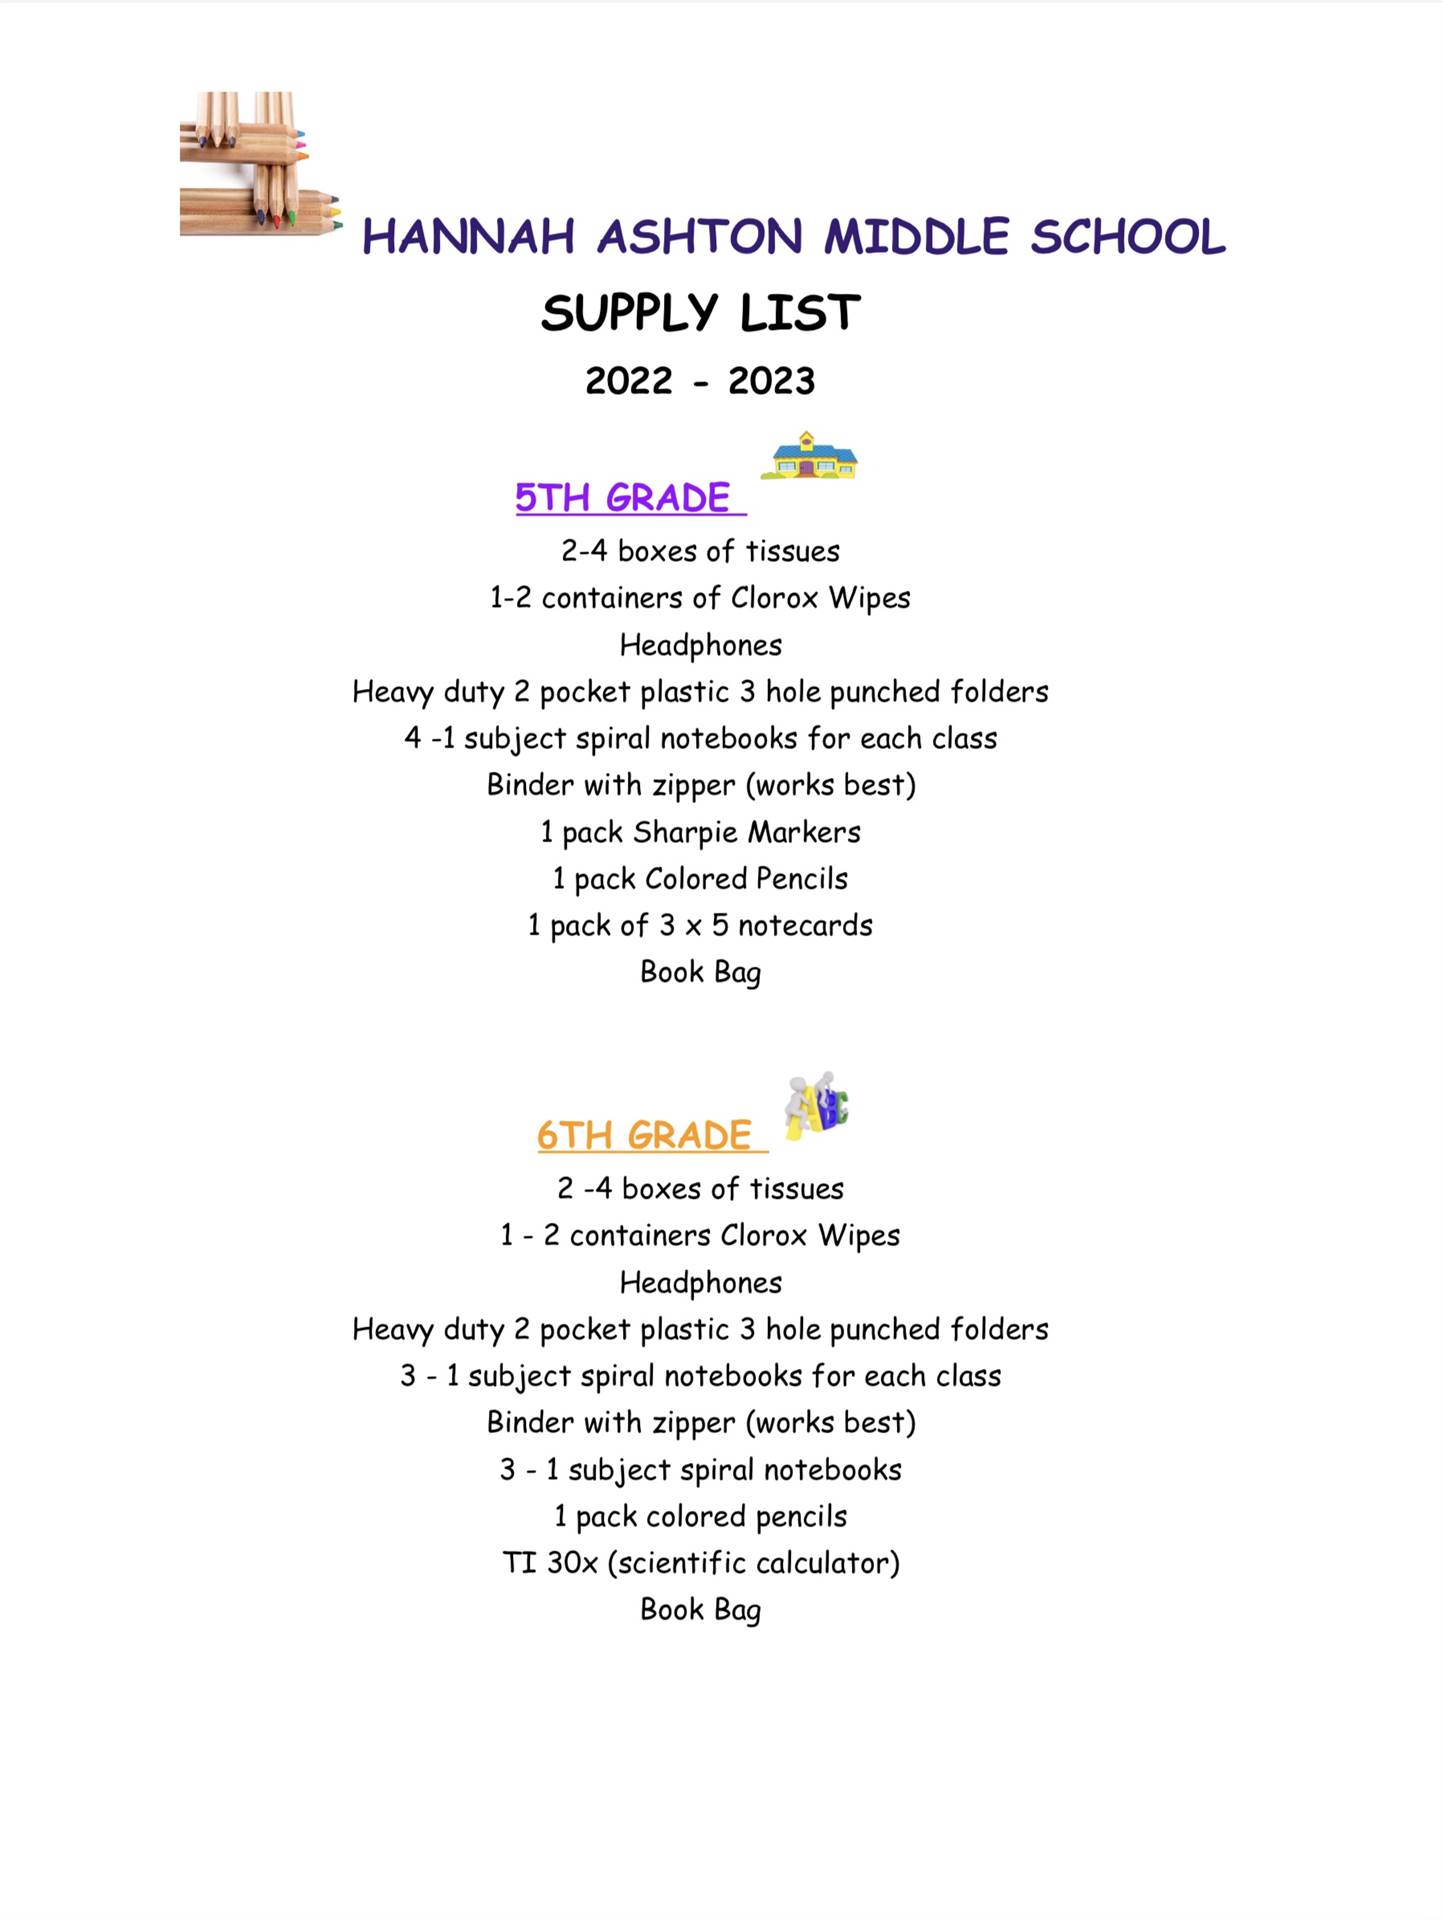 Supply List for 5th and 6th Grade